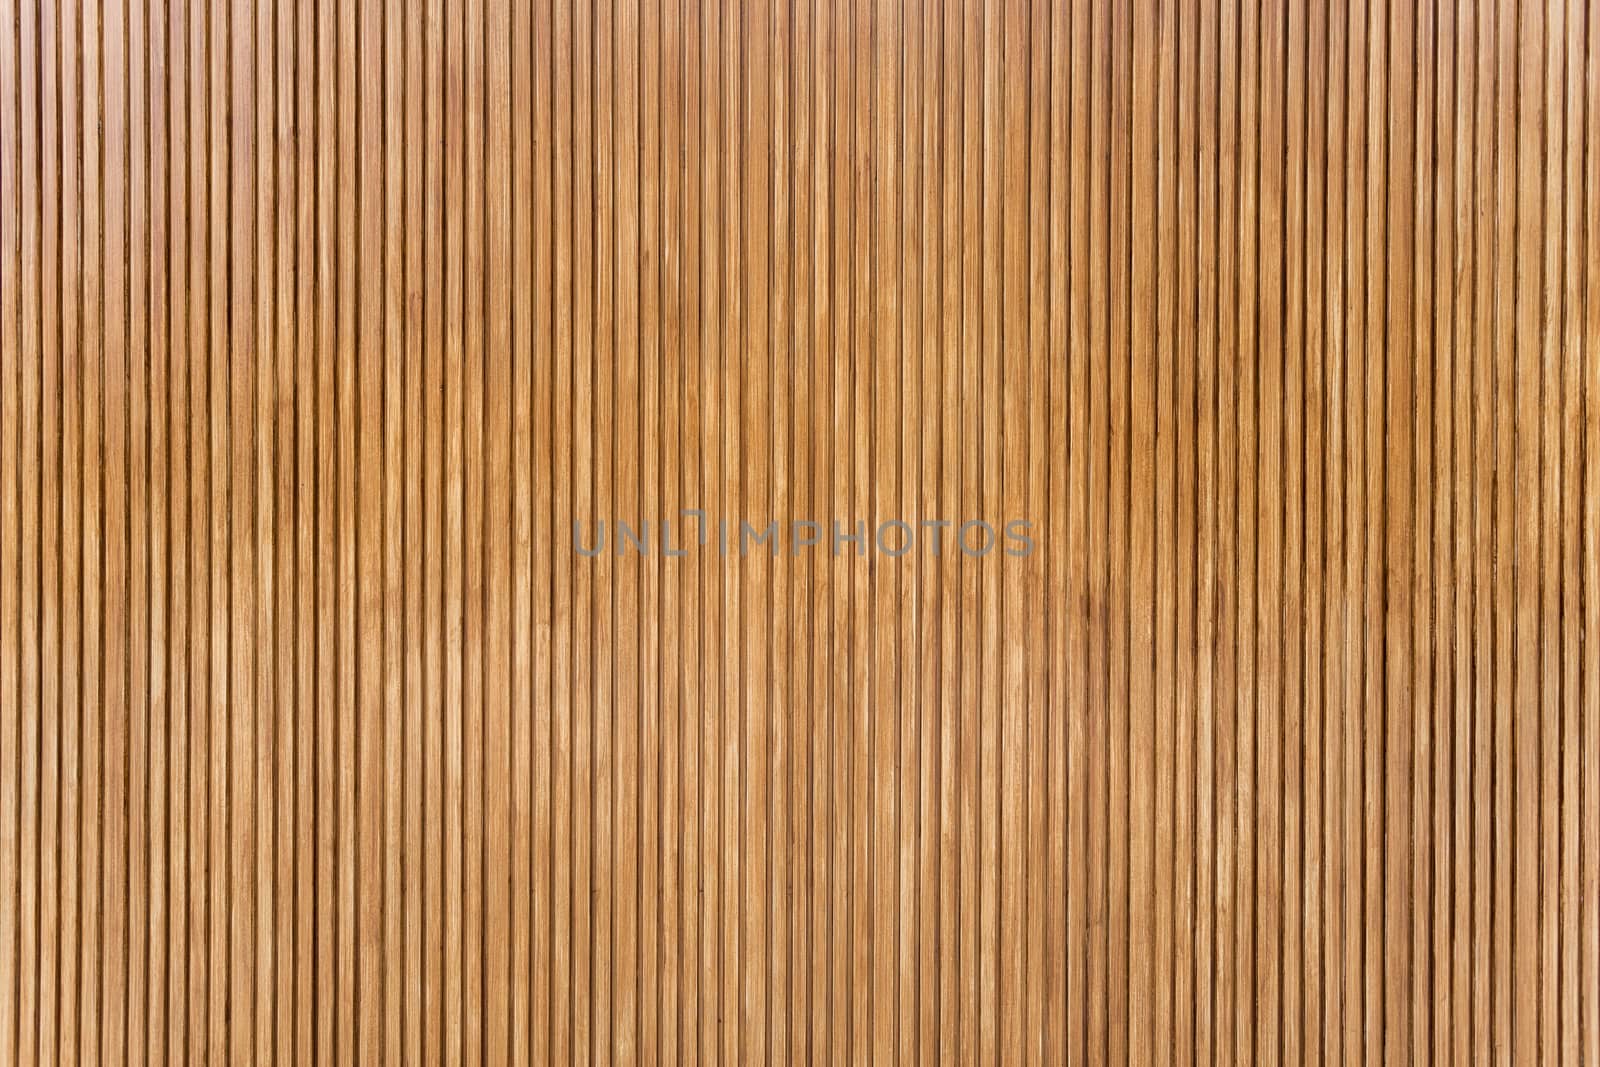 wood lath wall texture by antpkr